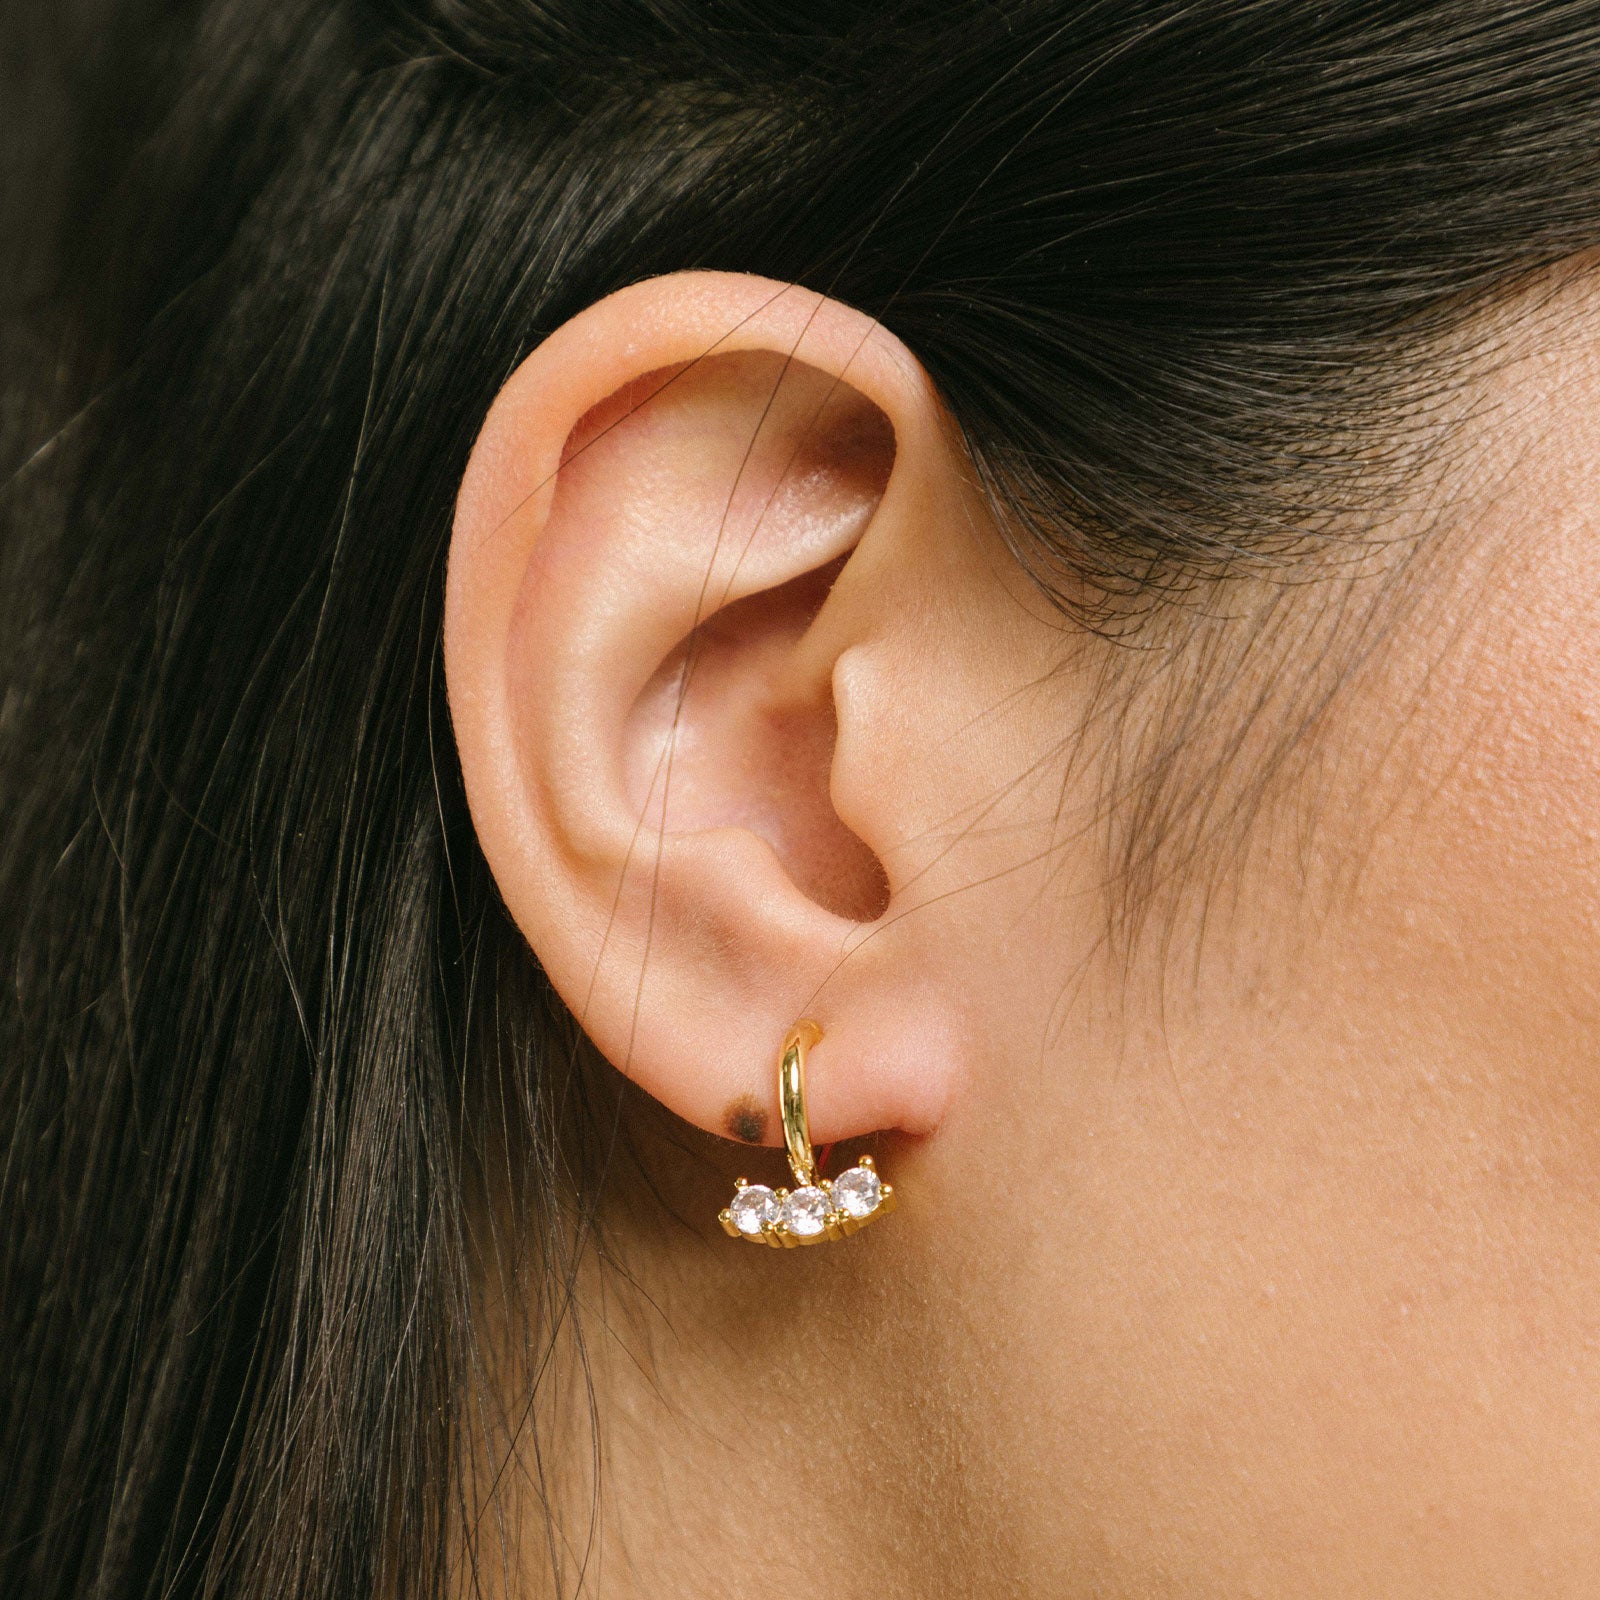 A model wearing the Juliette Clip-On Earrings offer a medium-strength, secure hold that lasts 24 hours. Easily adjustable with a gentle squeeze, these Mosquito Coil Clip-Ons are ideal for thick/large ears as well as sensitive ears. Crafted with gold-tone plated metal alloy and cubic zirconia, this item is sold as a single pair.